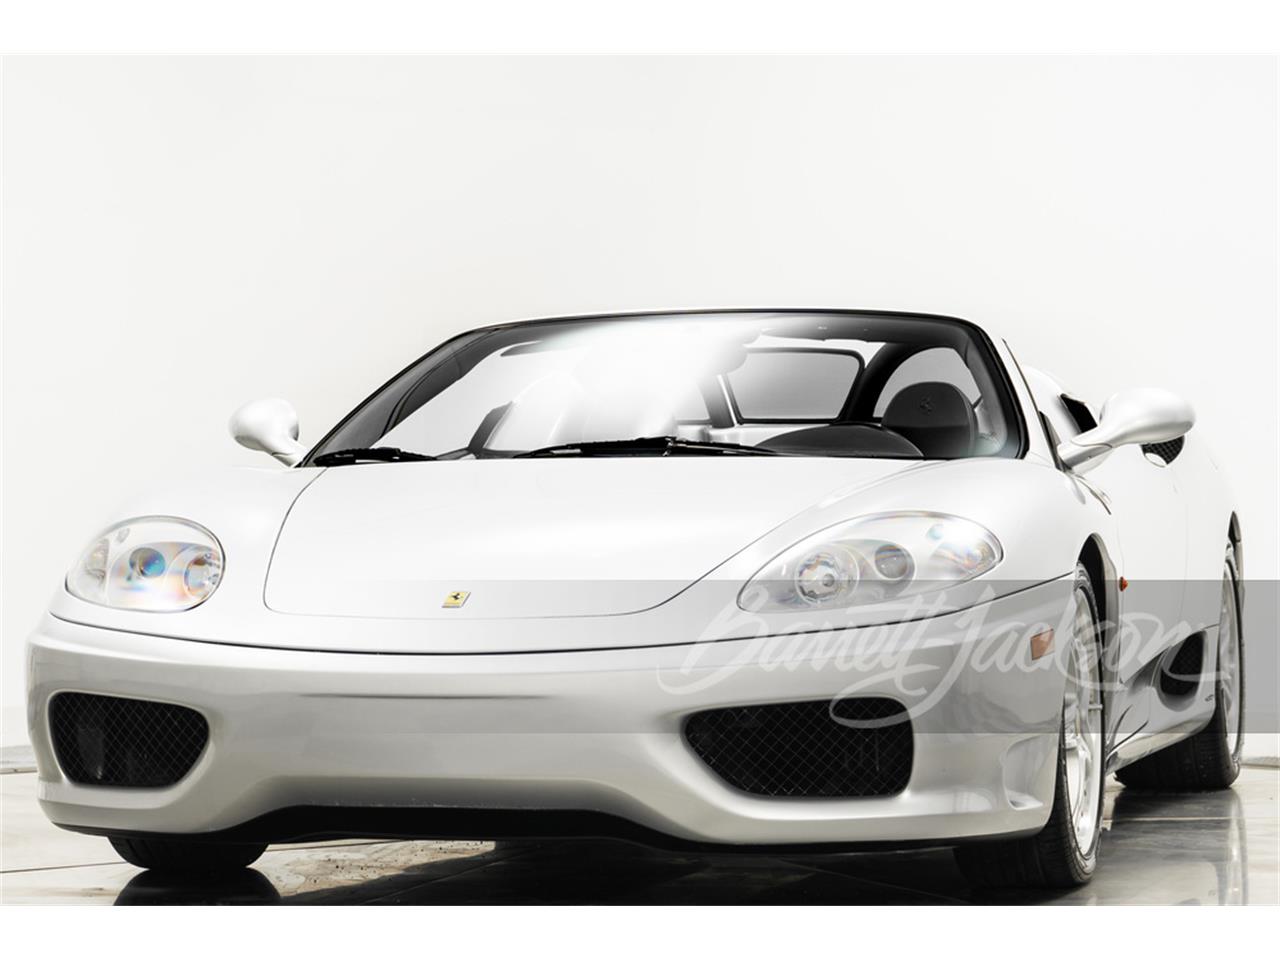 For Sale at Auction: 2005 Ferrari 360 Spider in Scottsdale, Arizona for sale in Scottsdale, AZ